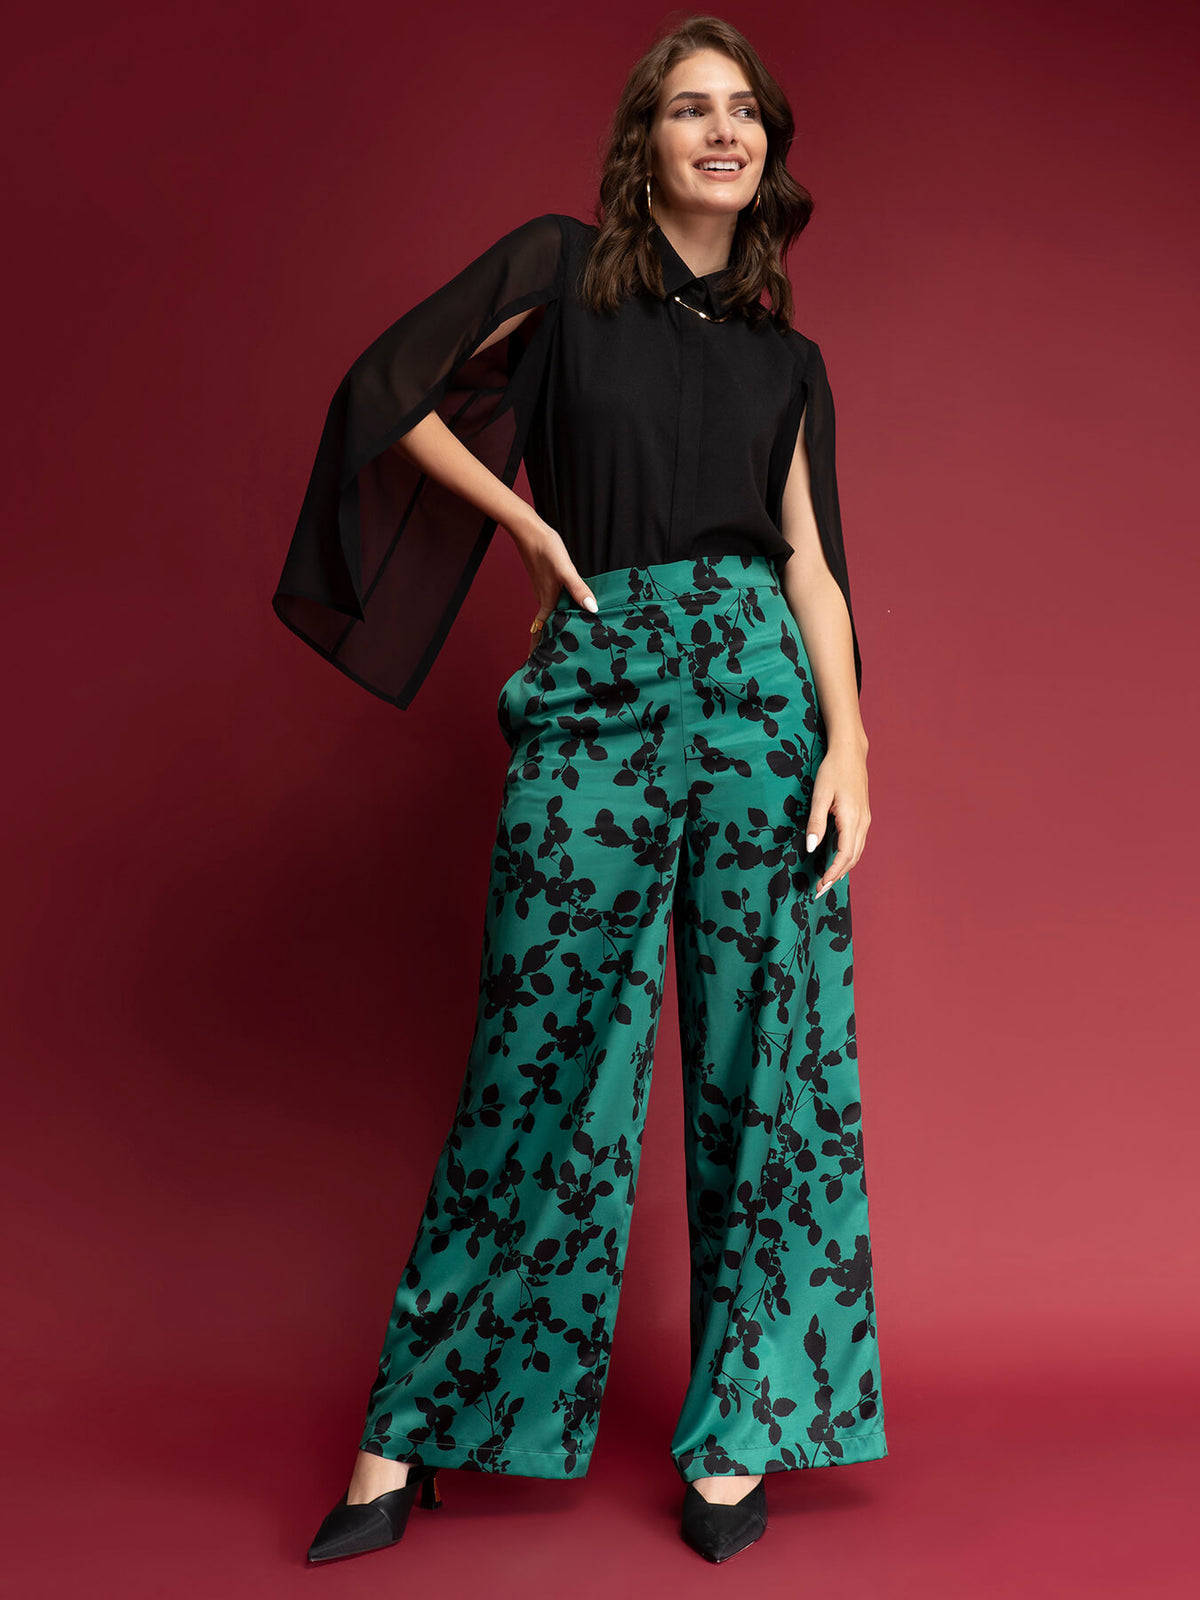 Satin Floral Print Trousers - Green And Black